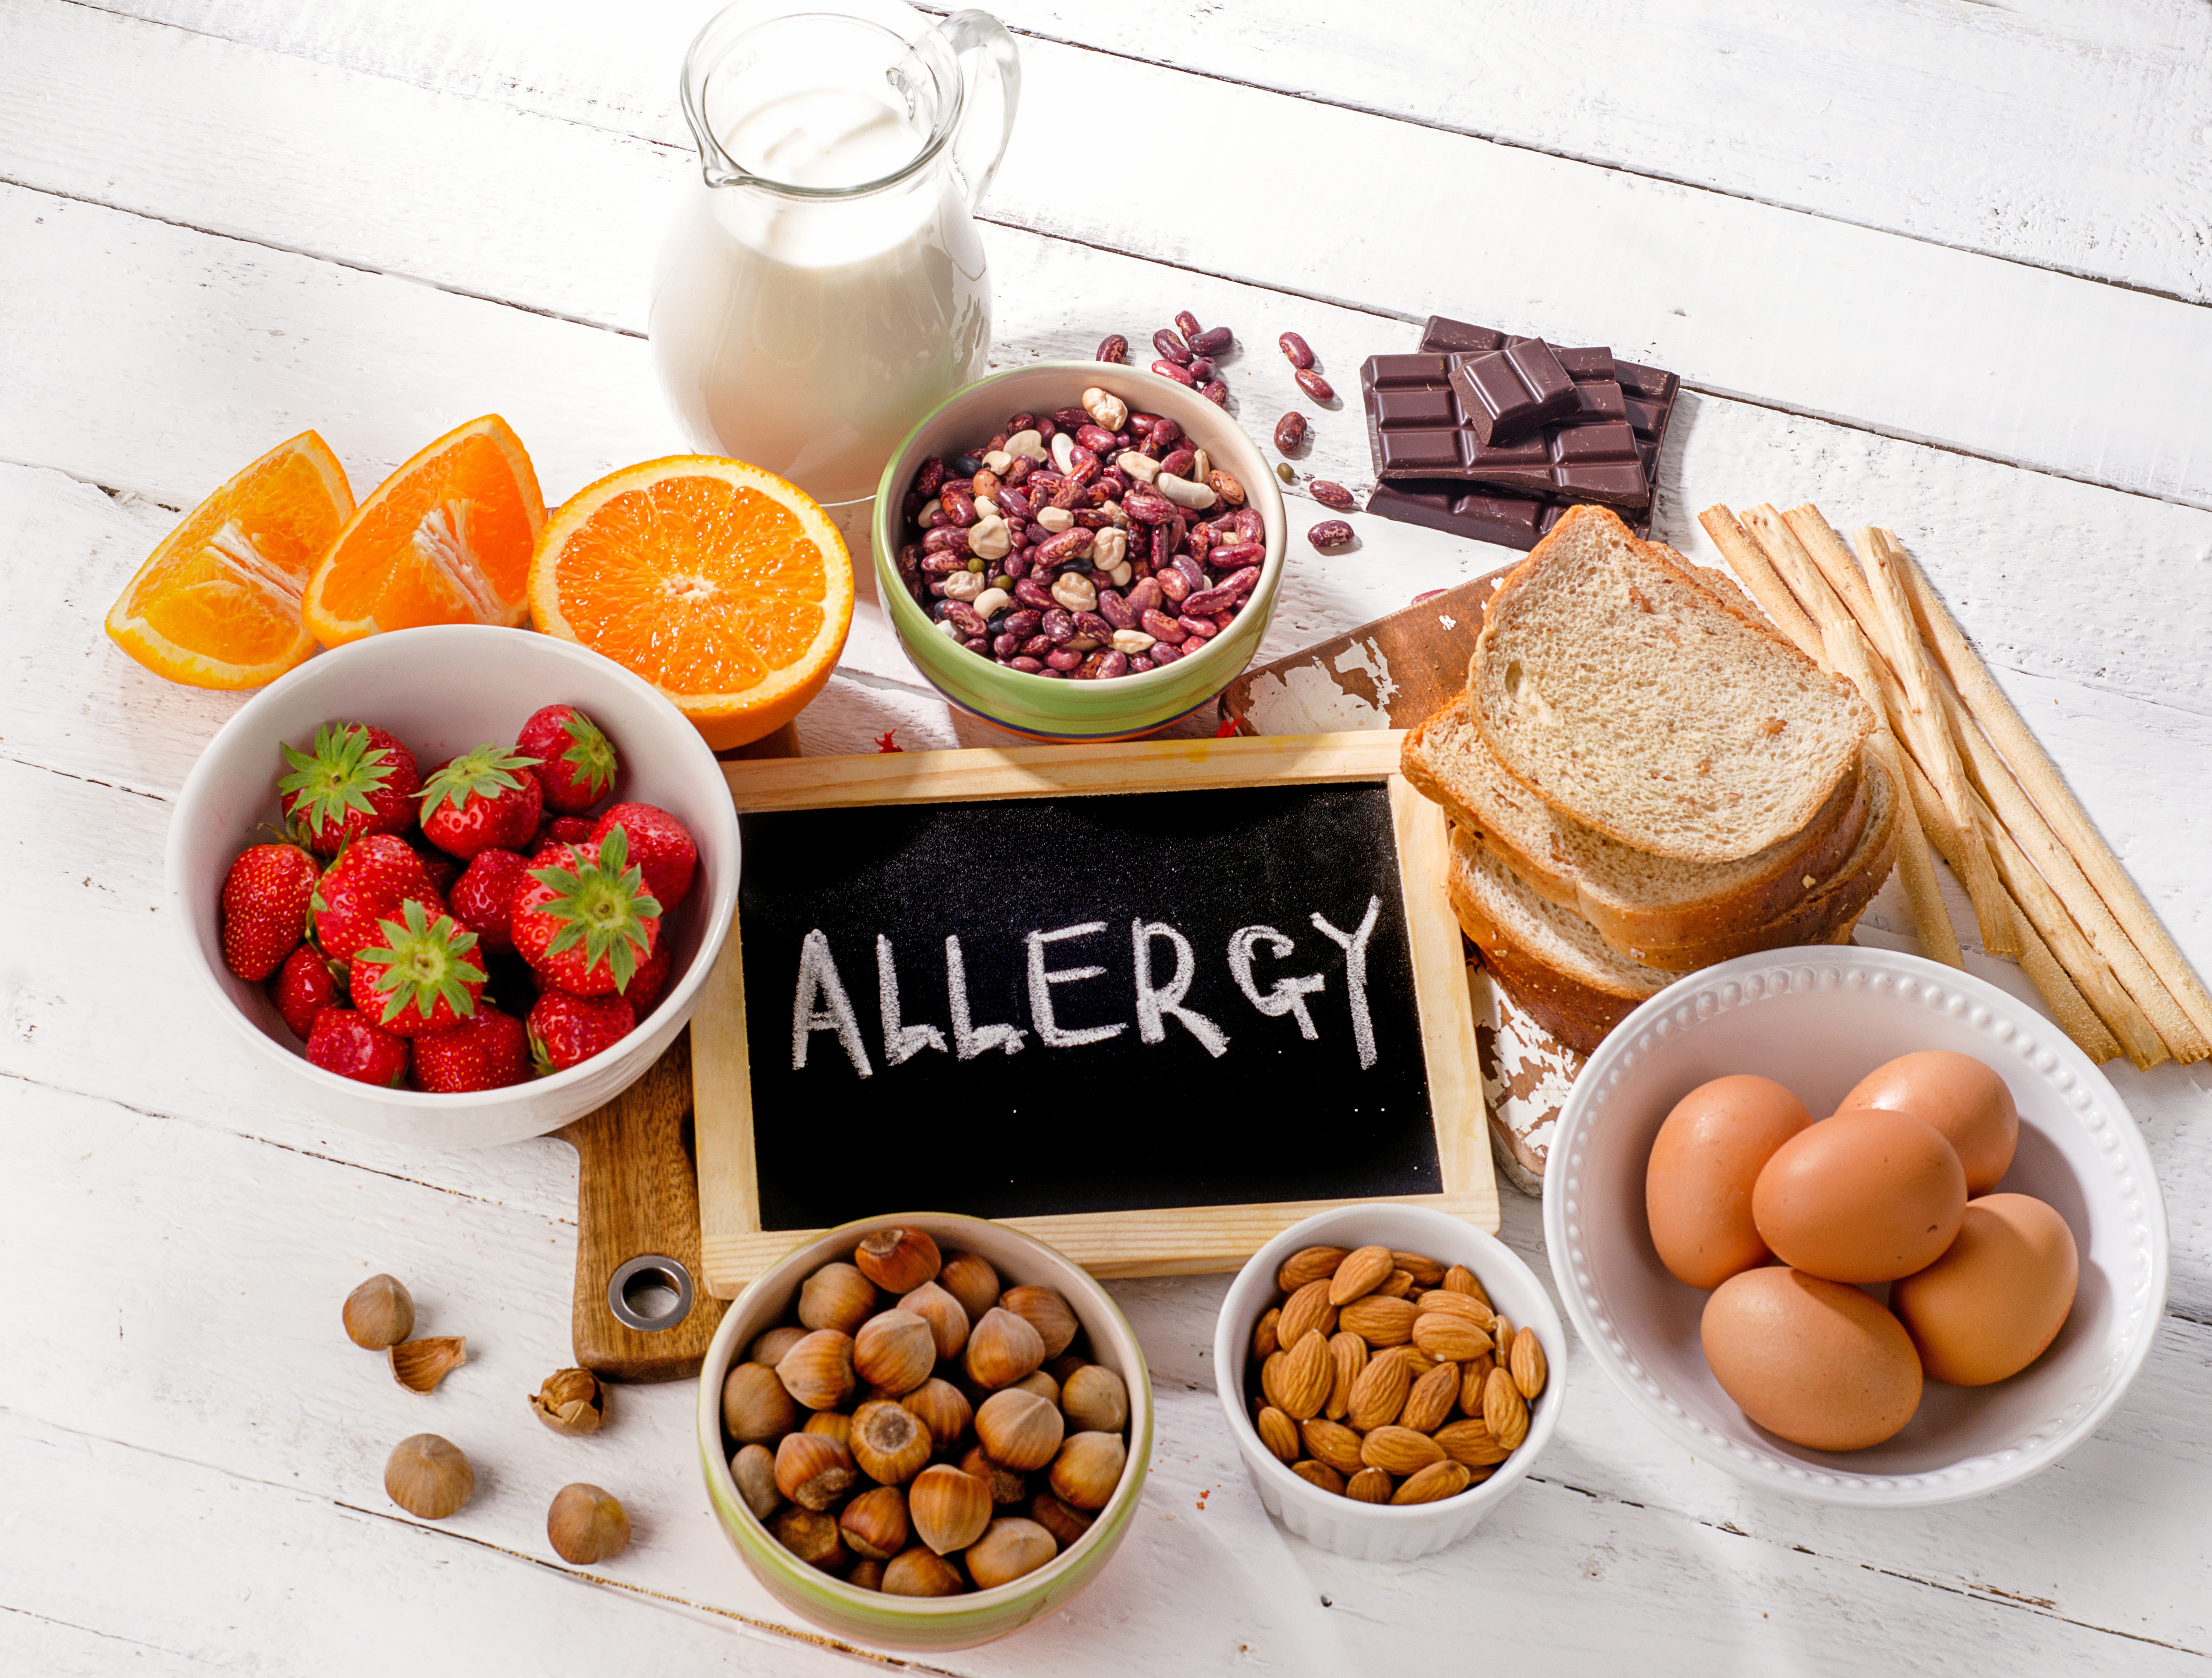 Various foods around a chalkboard reading "Allergy"